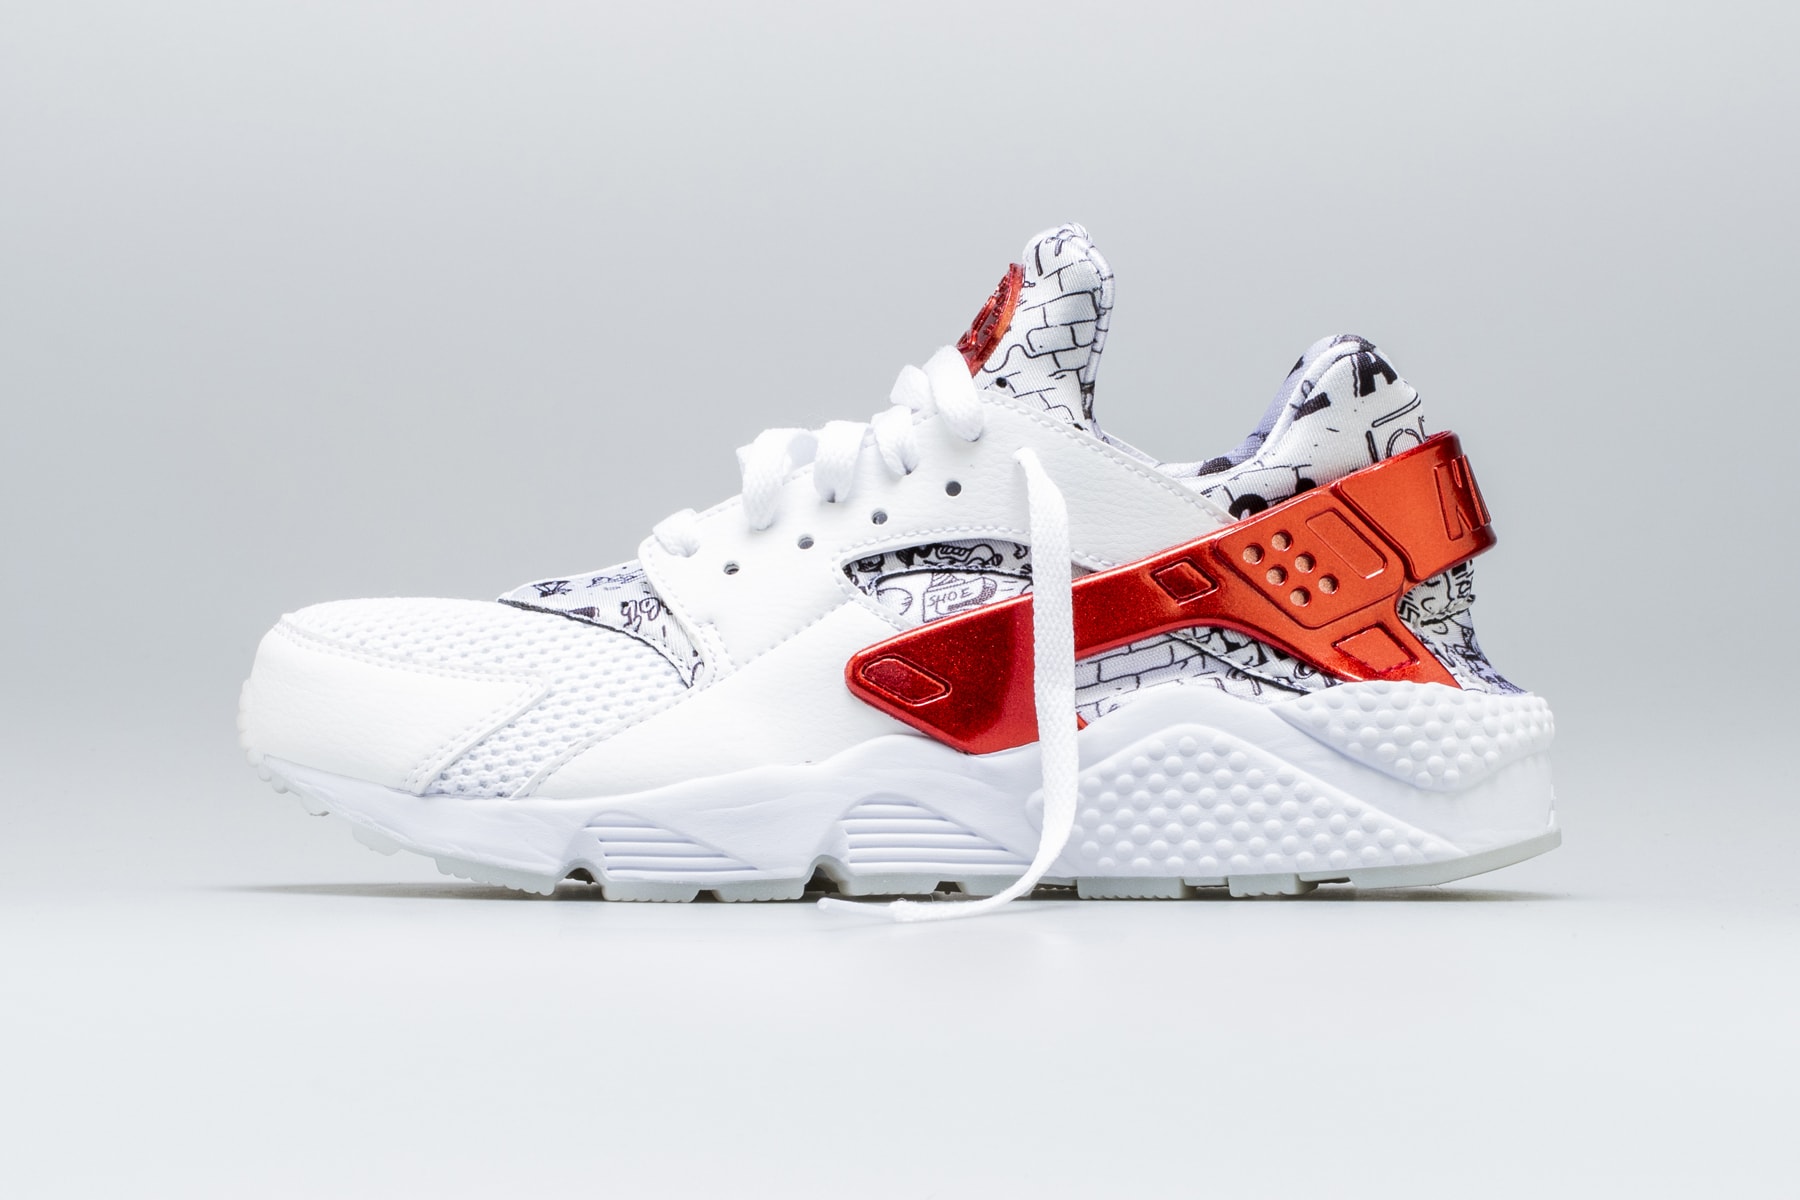 Shoe Palace Nike Air Huarache Release Date info price purchase 25th Anniversary White University Red Platinum colorway Joonbug July 28